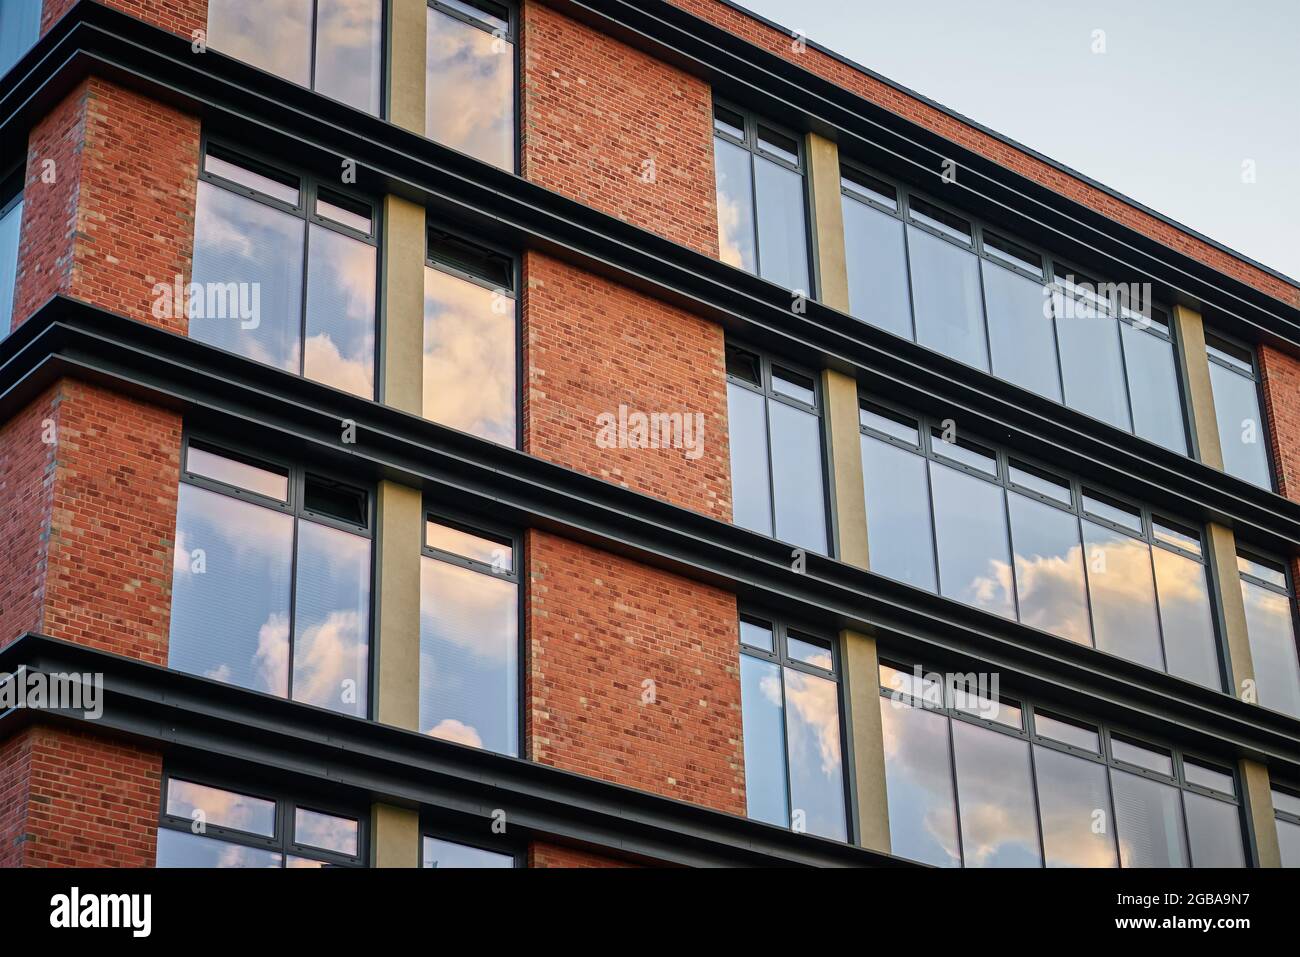 Facade of building. Windows on the residential building. Modern architecture style Stock Photo